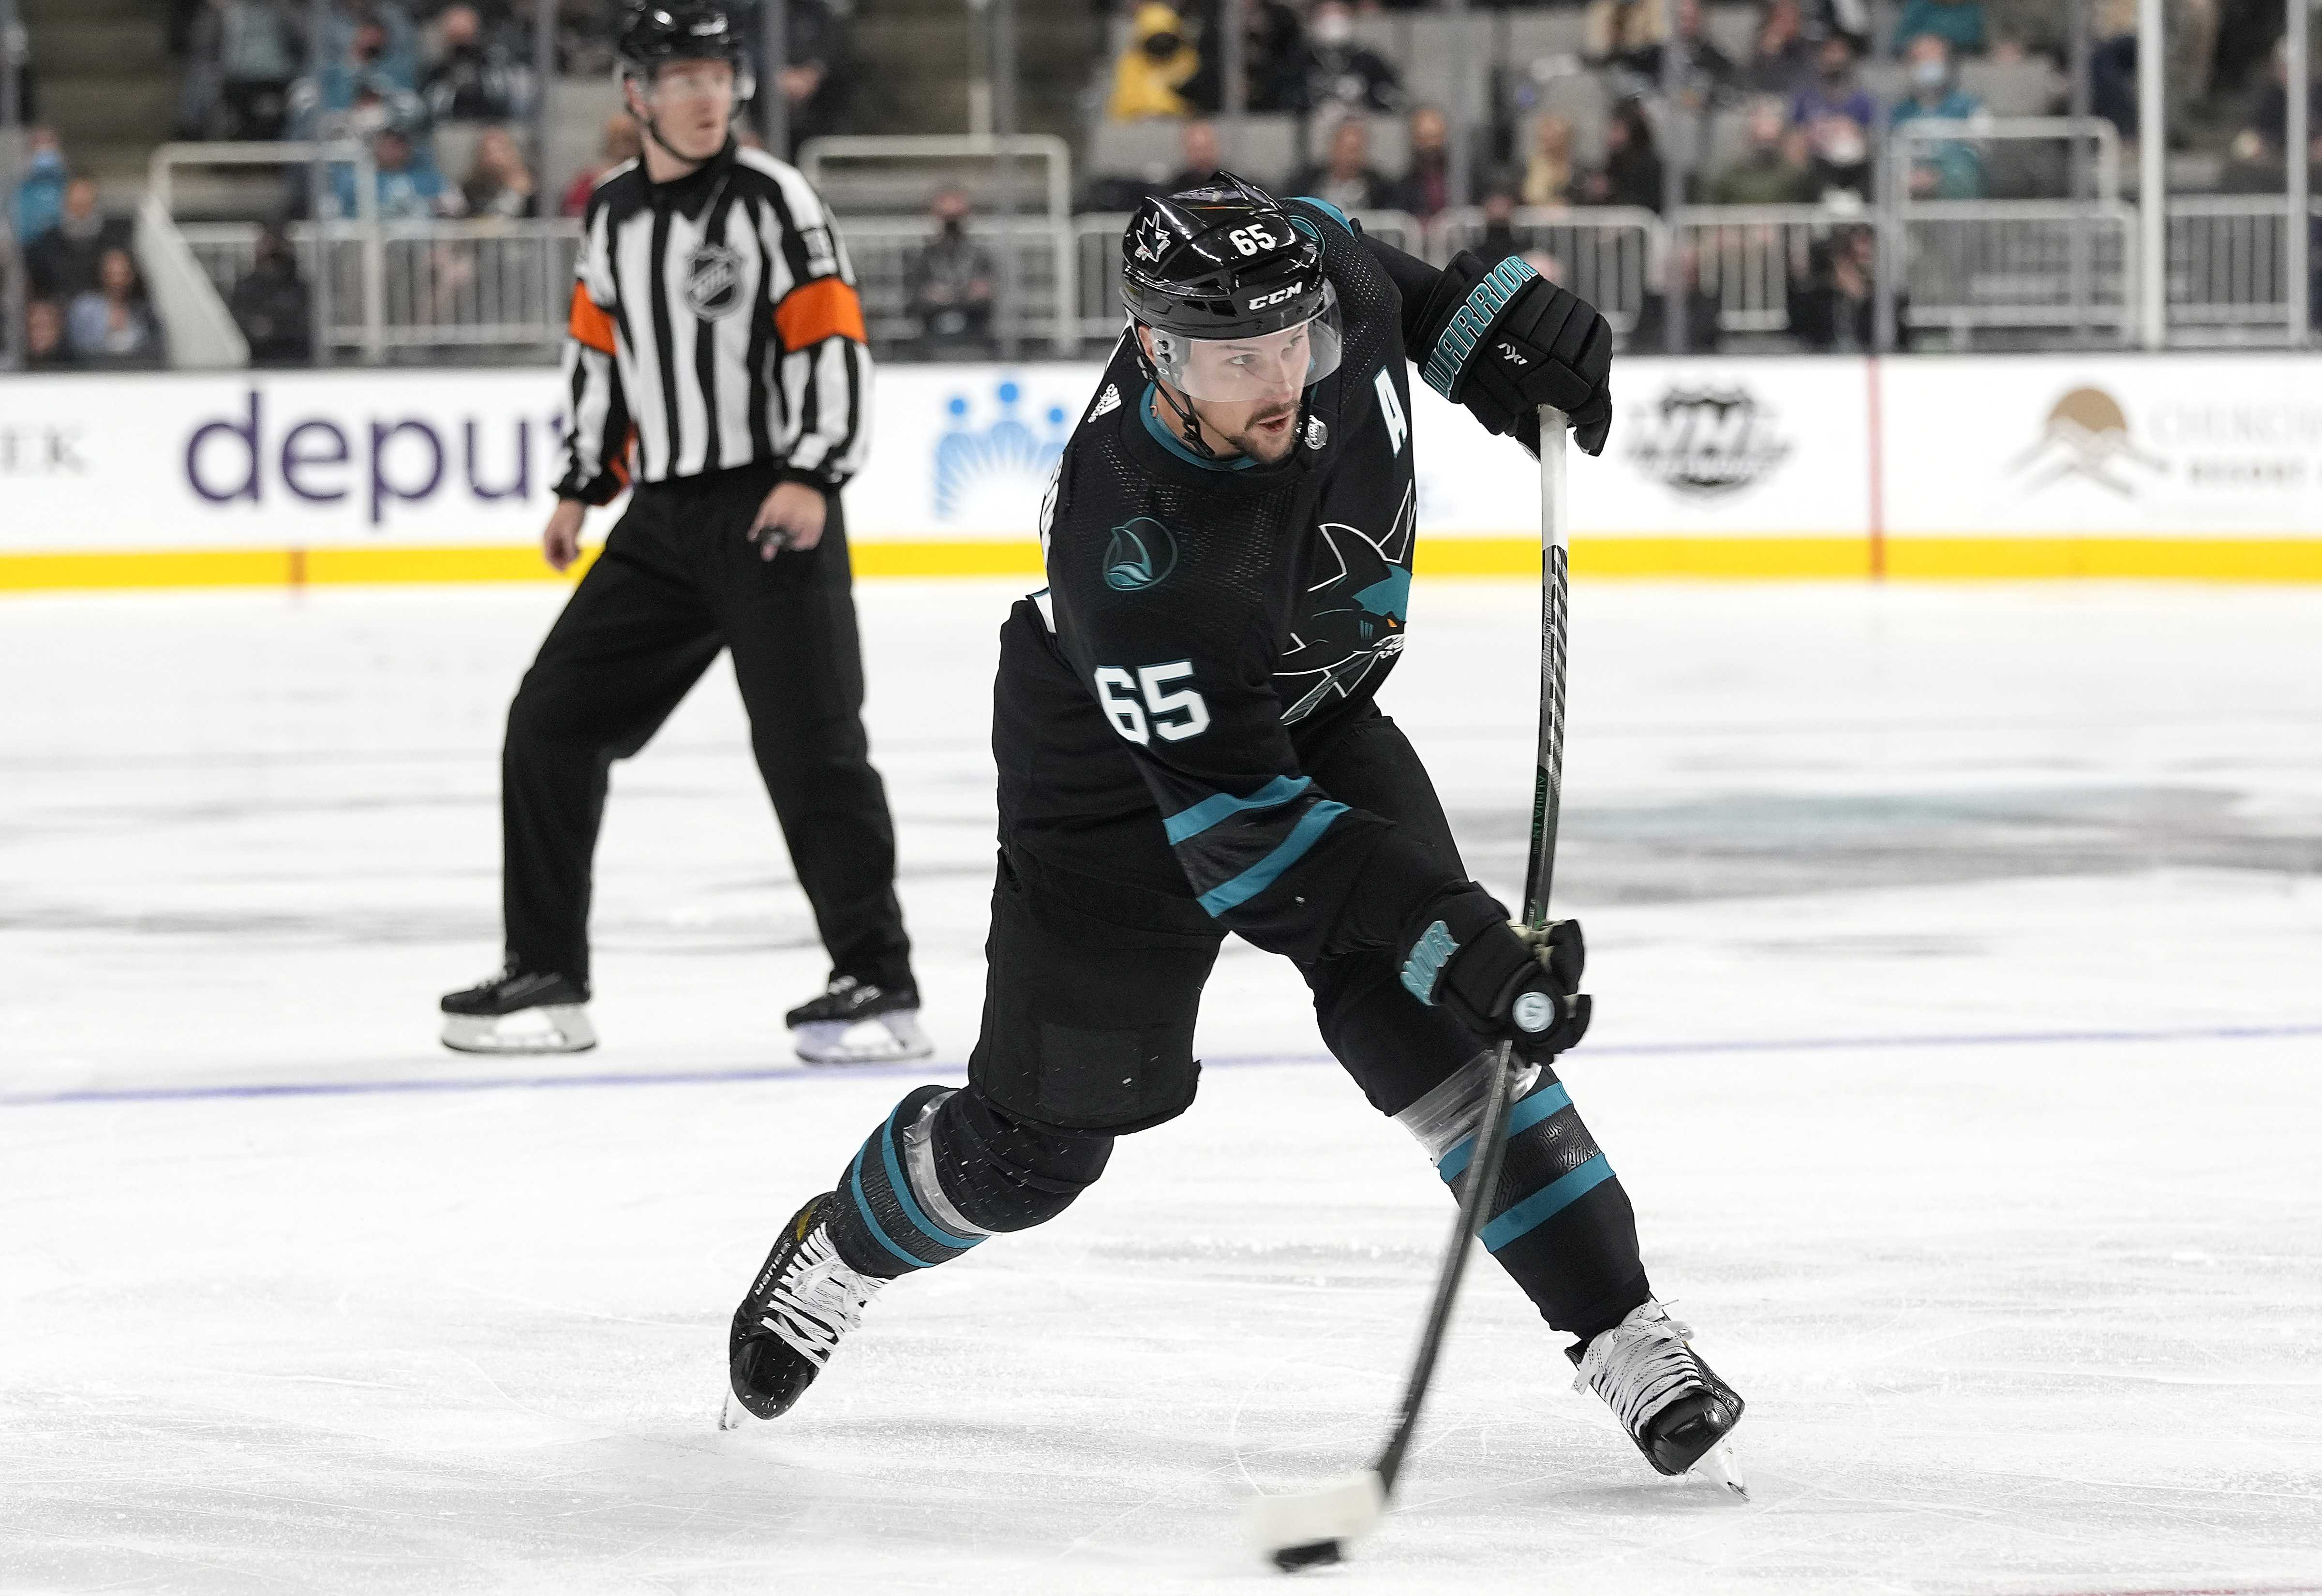 Erik Karlsson #65 of the San Jose Sharks shoots on goal against the Montreal Canadiens during the second period at SAP Center on October 28, 2021 in San Jose, California.